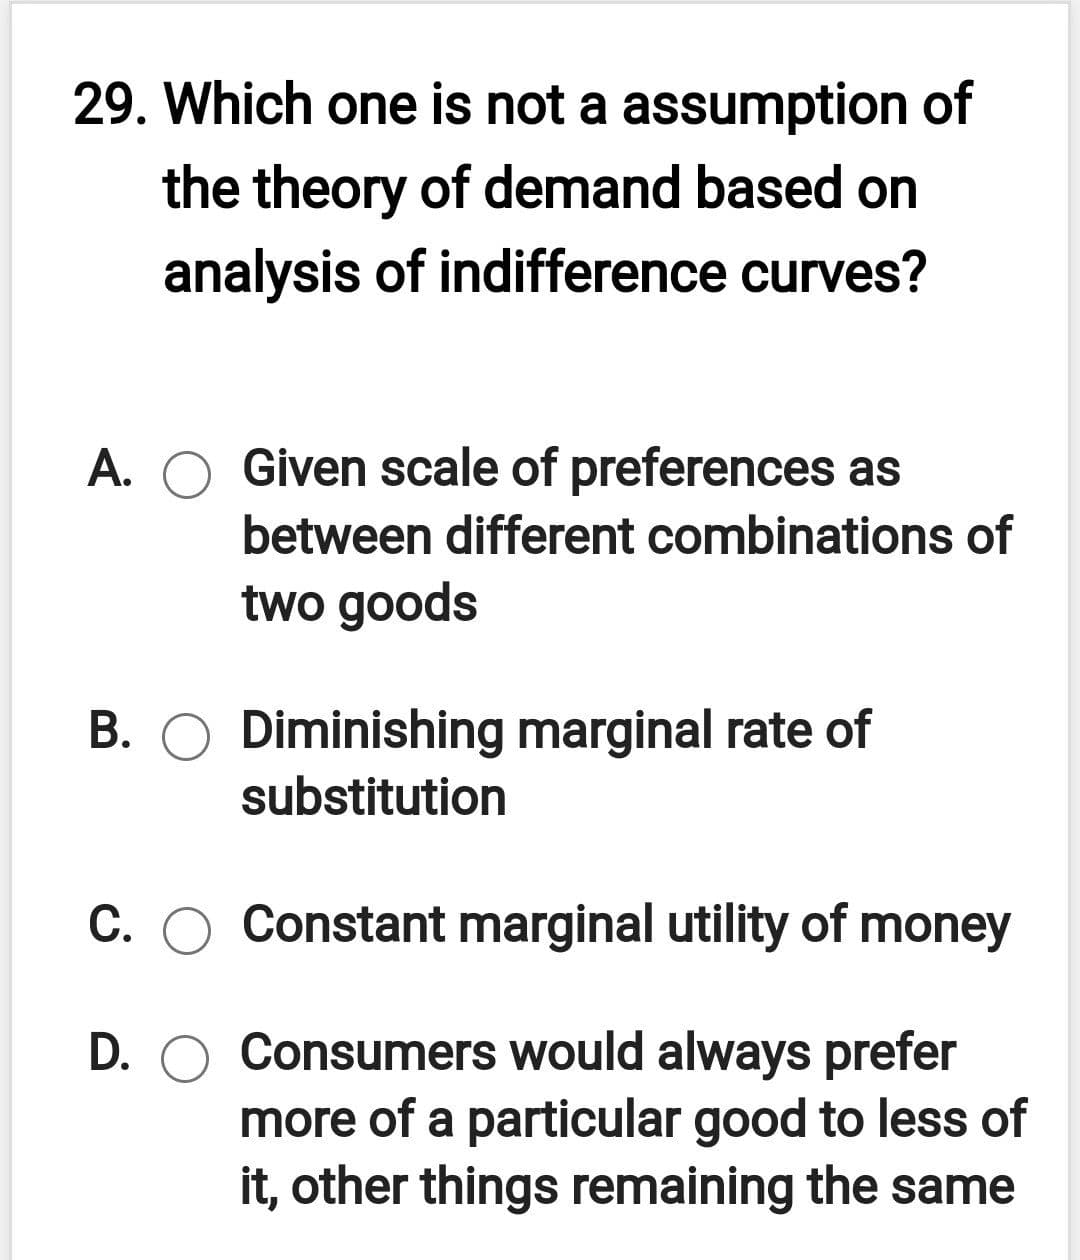 29. Which one is not a assumption of
the theory of demand based on
analysis of indifference curves?
A. O Given scale of preferences as
between different combinations of
two goods
B. O Diminishing marginal rate of
substitution
C. O Constant marginal utility of money
D. O Consumers would always prefer
more of a particular good to less of
it, other things remaining the same
